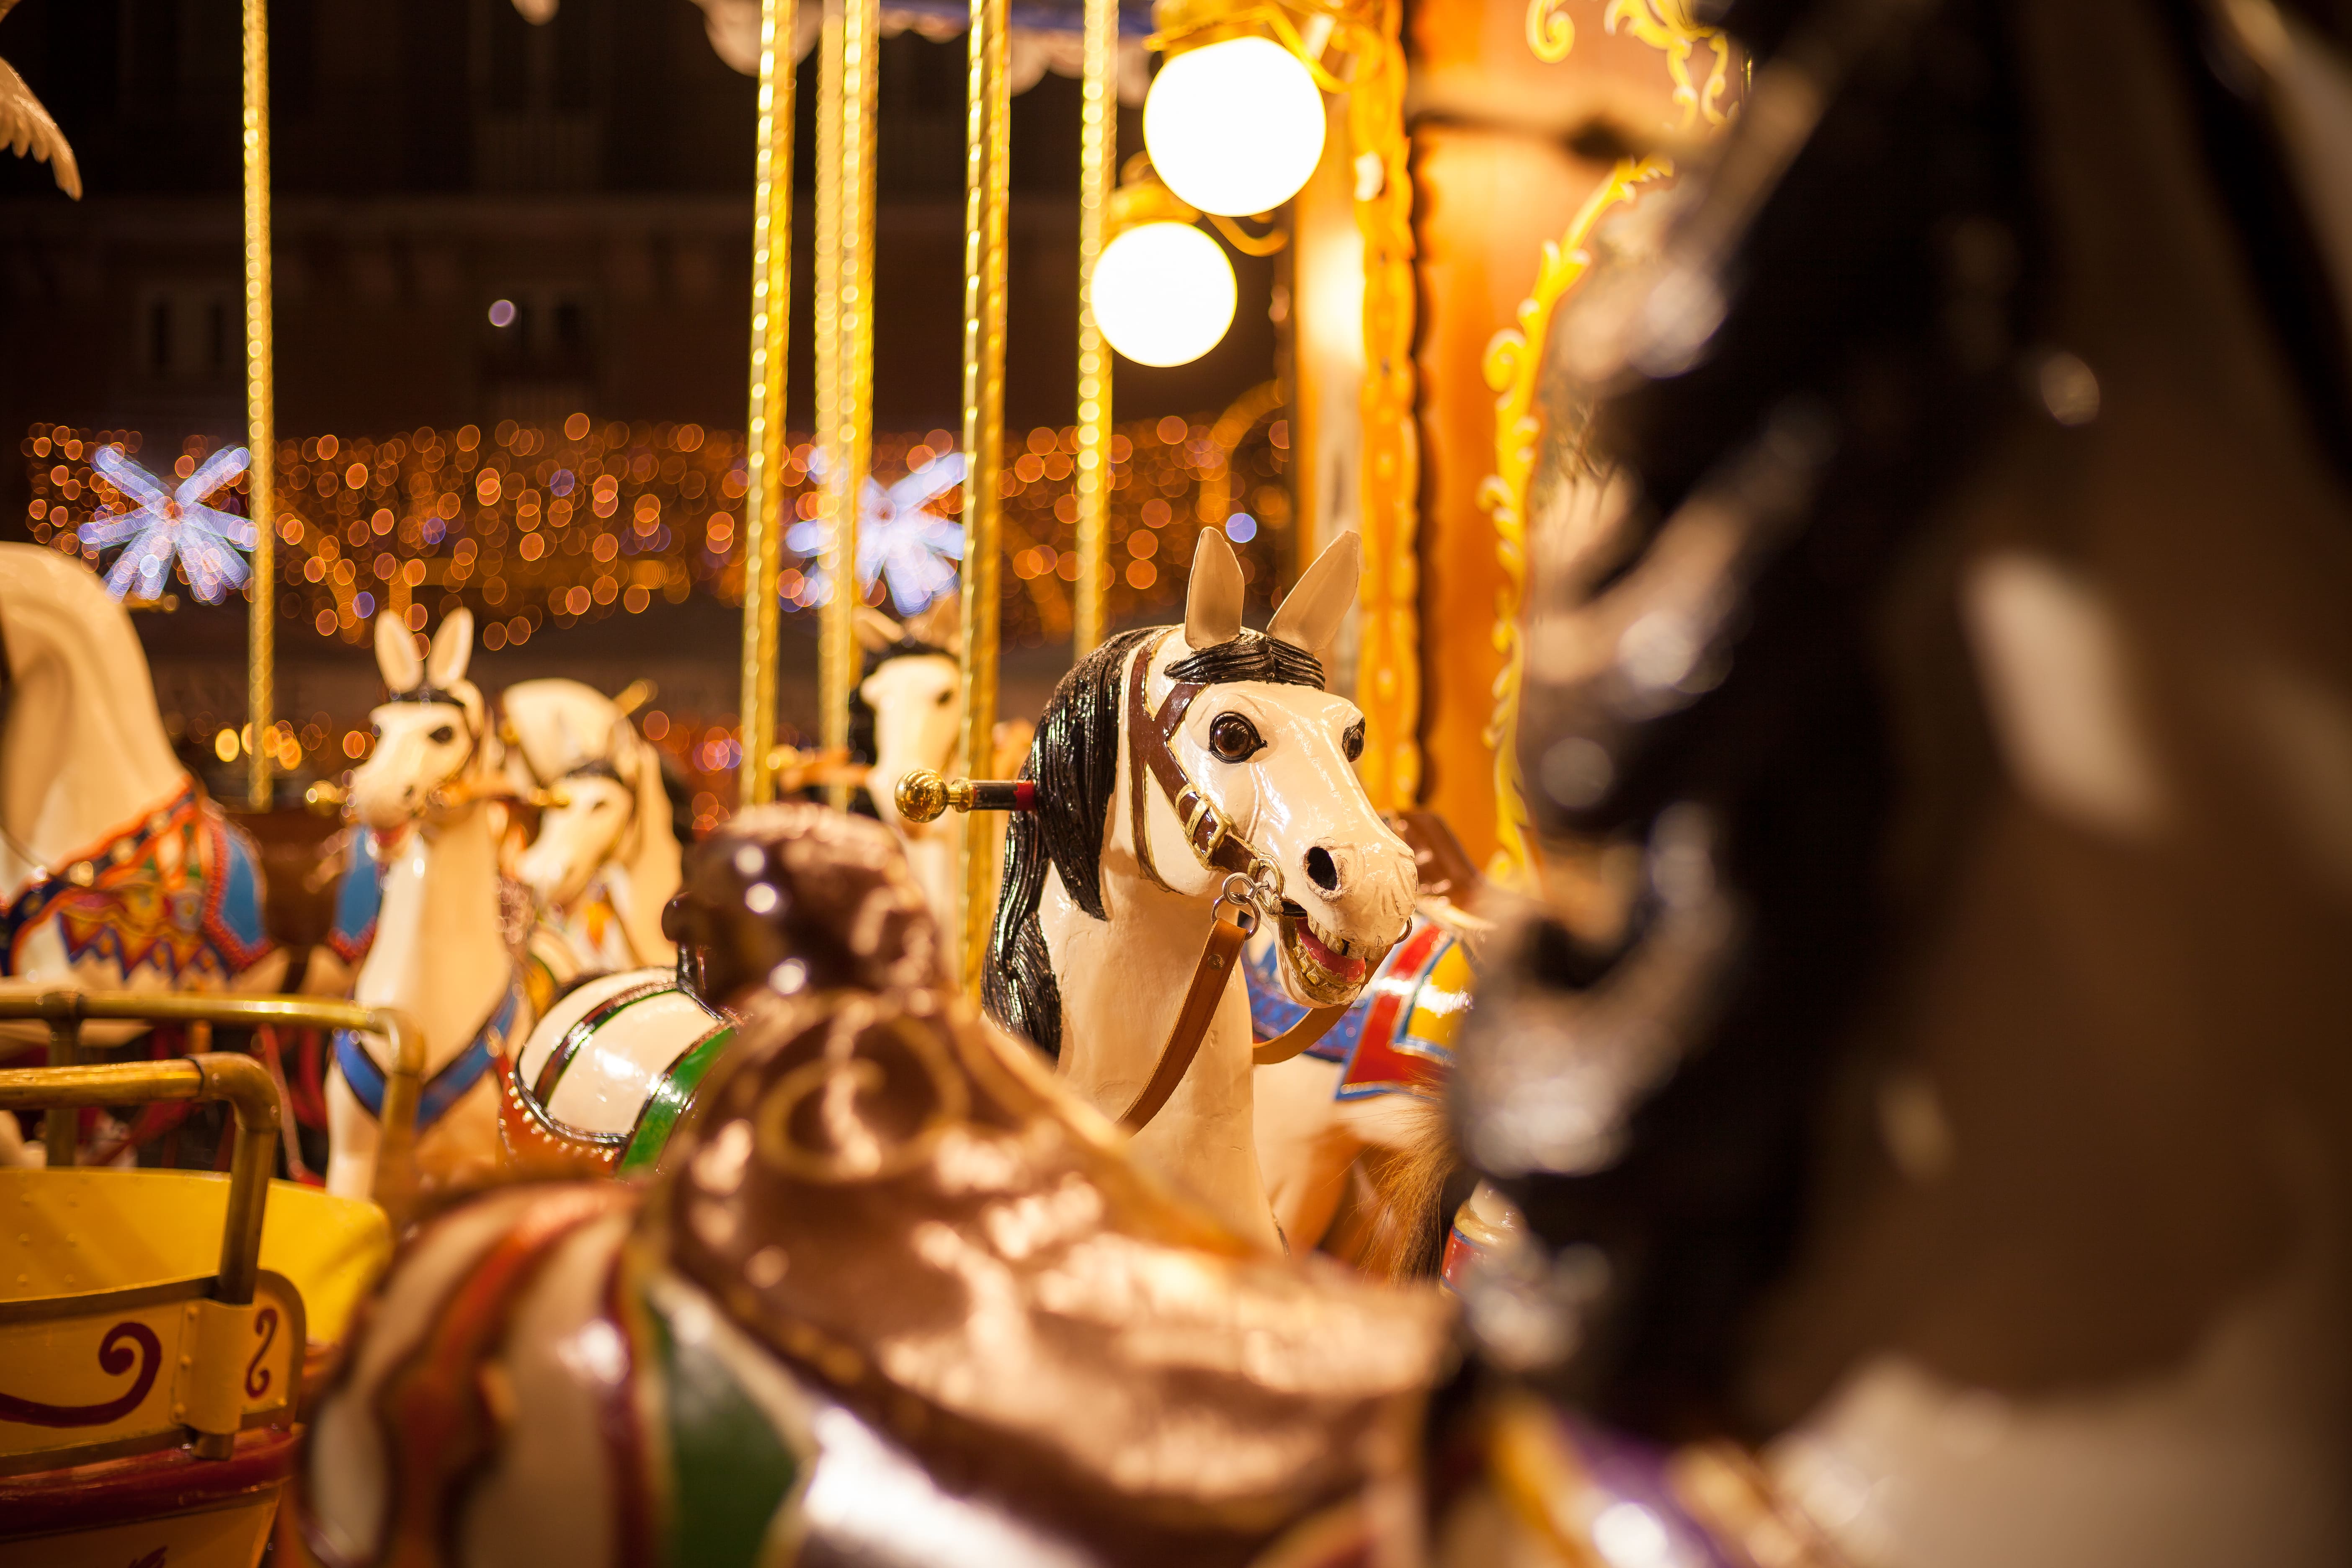 Carousel at the Christmas market of Piazza Navona in Rome